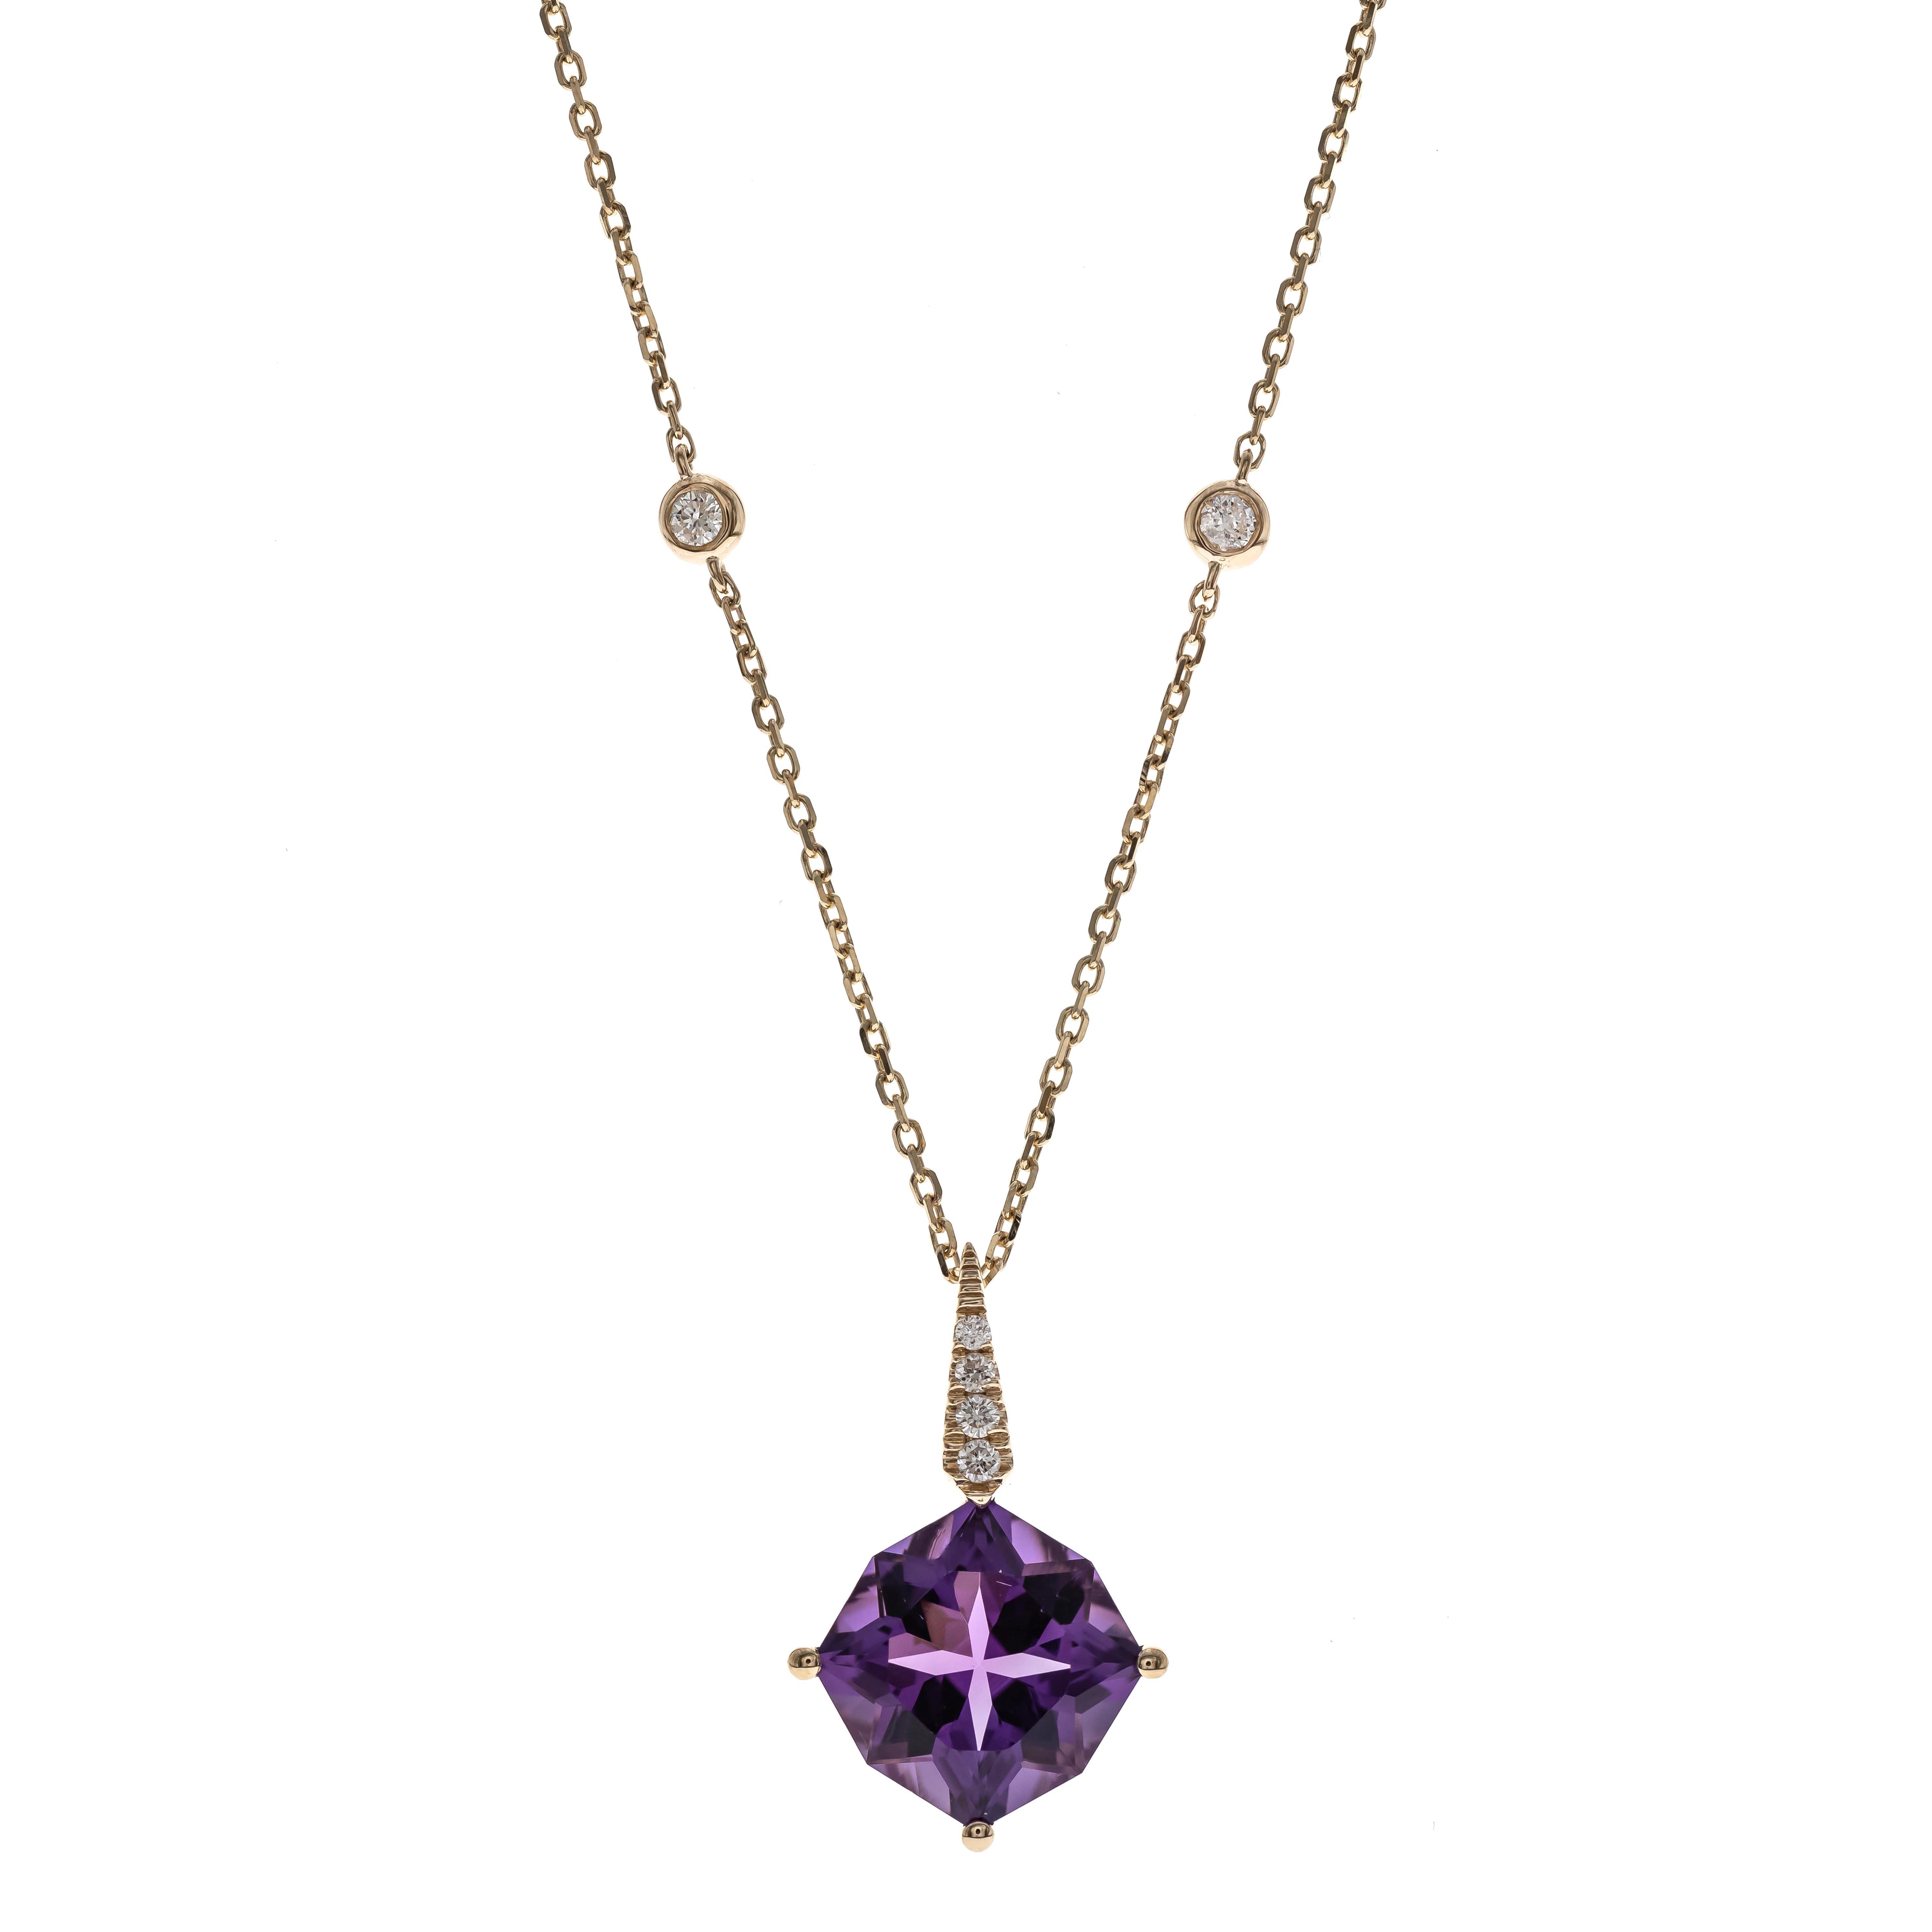 Decorate yourself in elegance with this Pendant is crafted from 14-karat Yellow Gold by Gin & Grace. This Pendant is made up of 10.0 mm Cushion-cut Amethyst (1 pcs) 3.31 carat and Round-cut White Diamond (6 Pcs) 0.09 Carat. This Pendant is weight